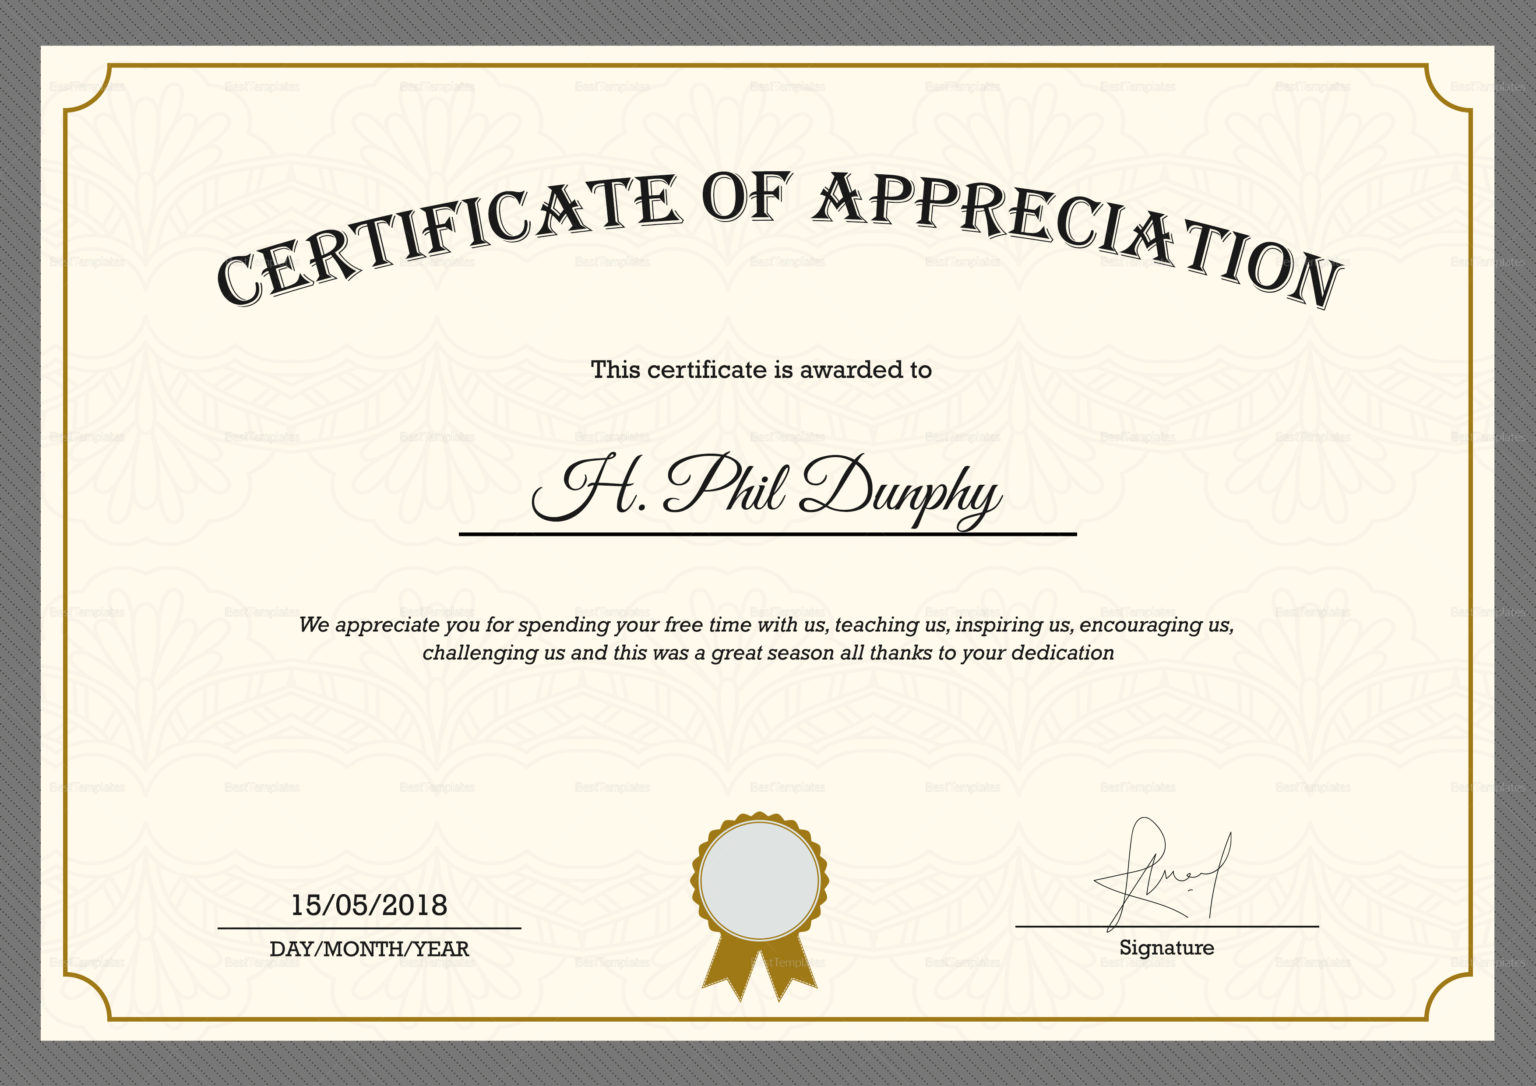 fillable-certificate-of-appreciation-editable-images-and-photos-finder